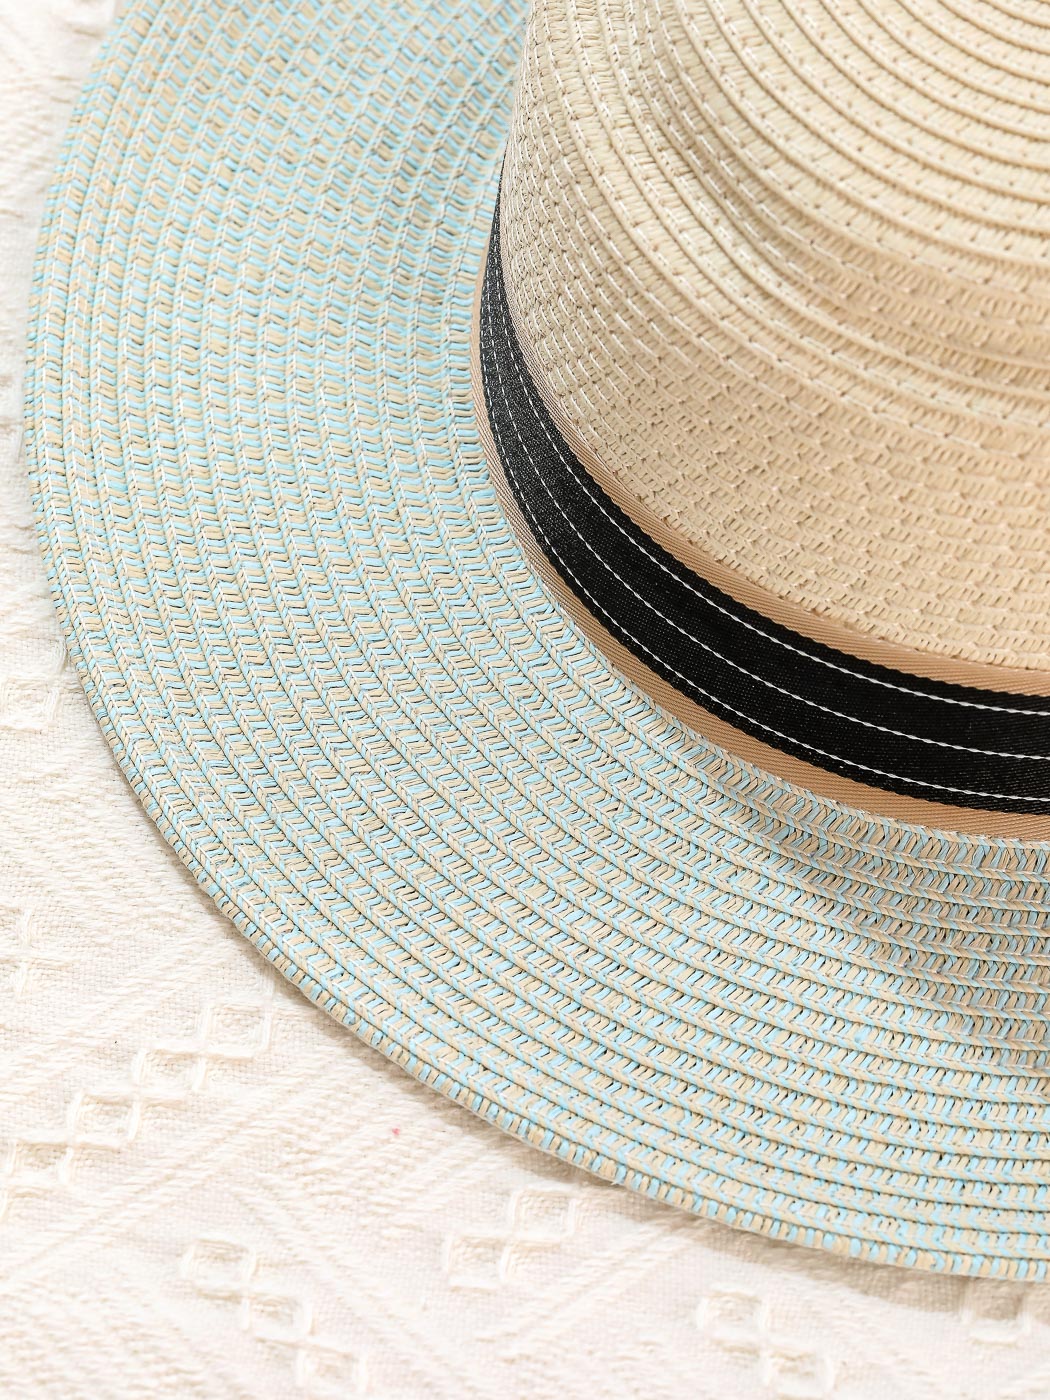 MINISO BRITISH STYLE BICOLOR STRAW HAT WITH FLAT TOP ( BLUE ) 2010116812105 FASHIONABLE HAT